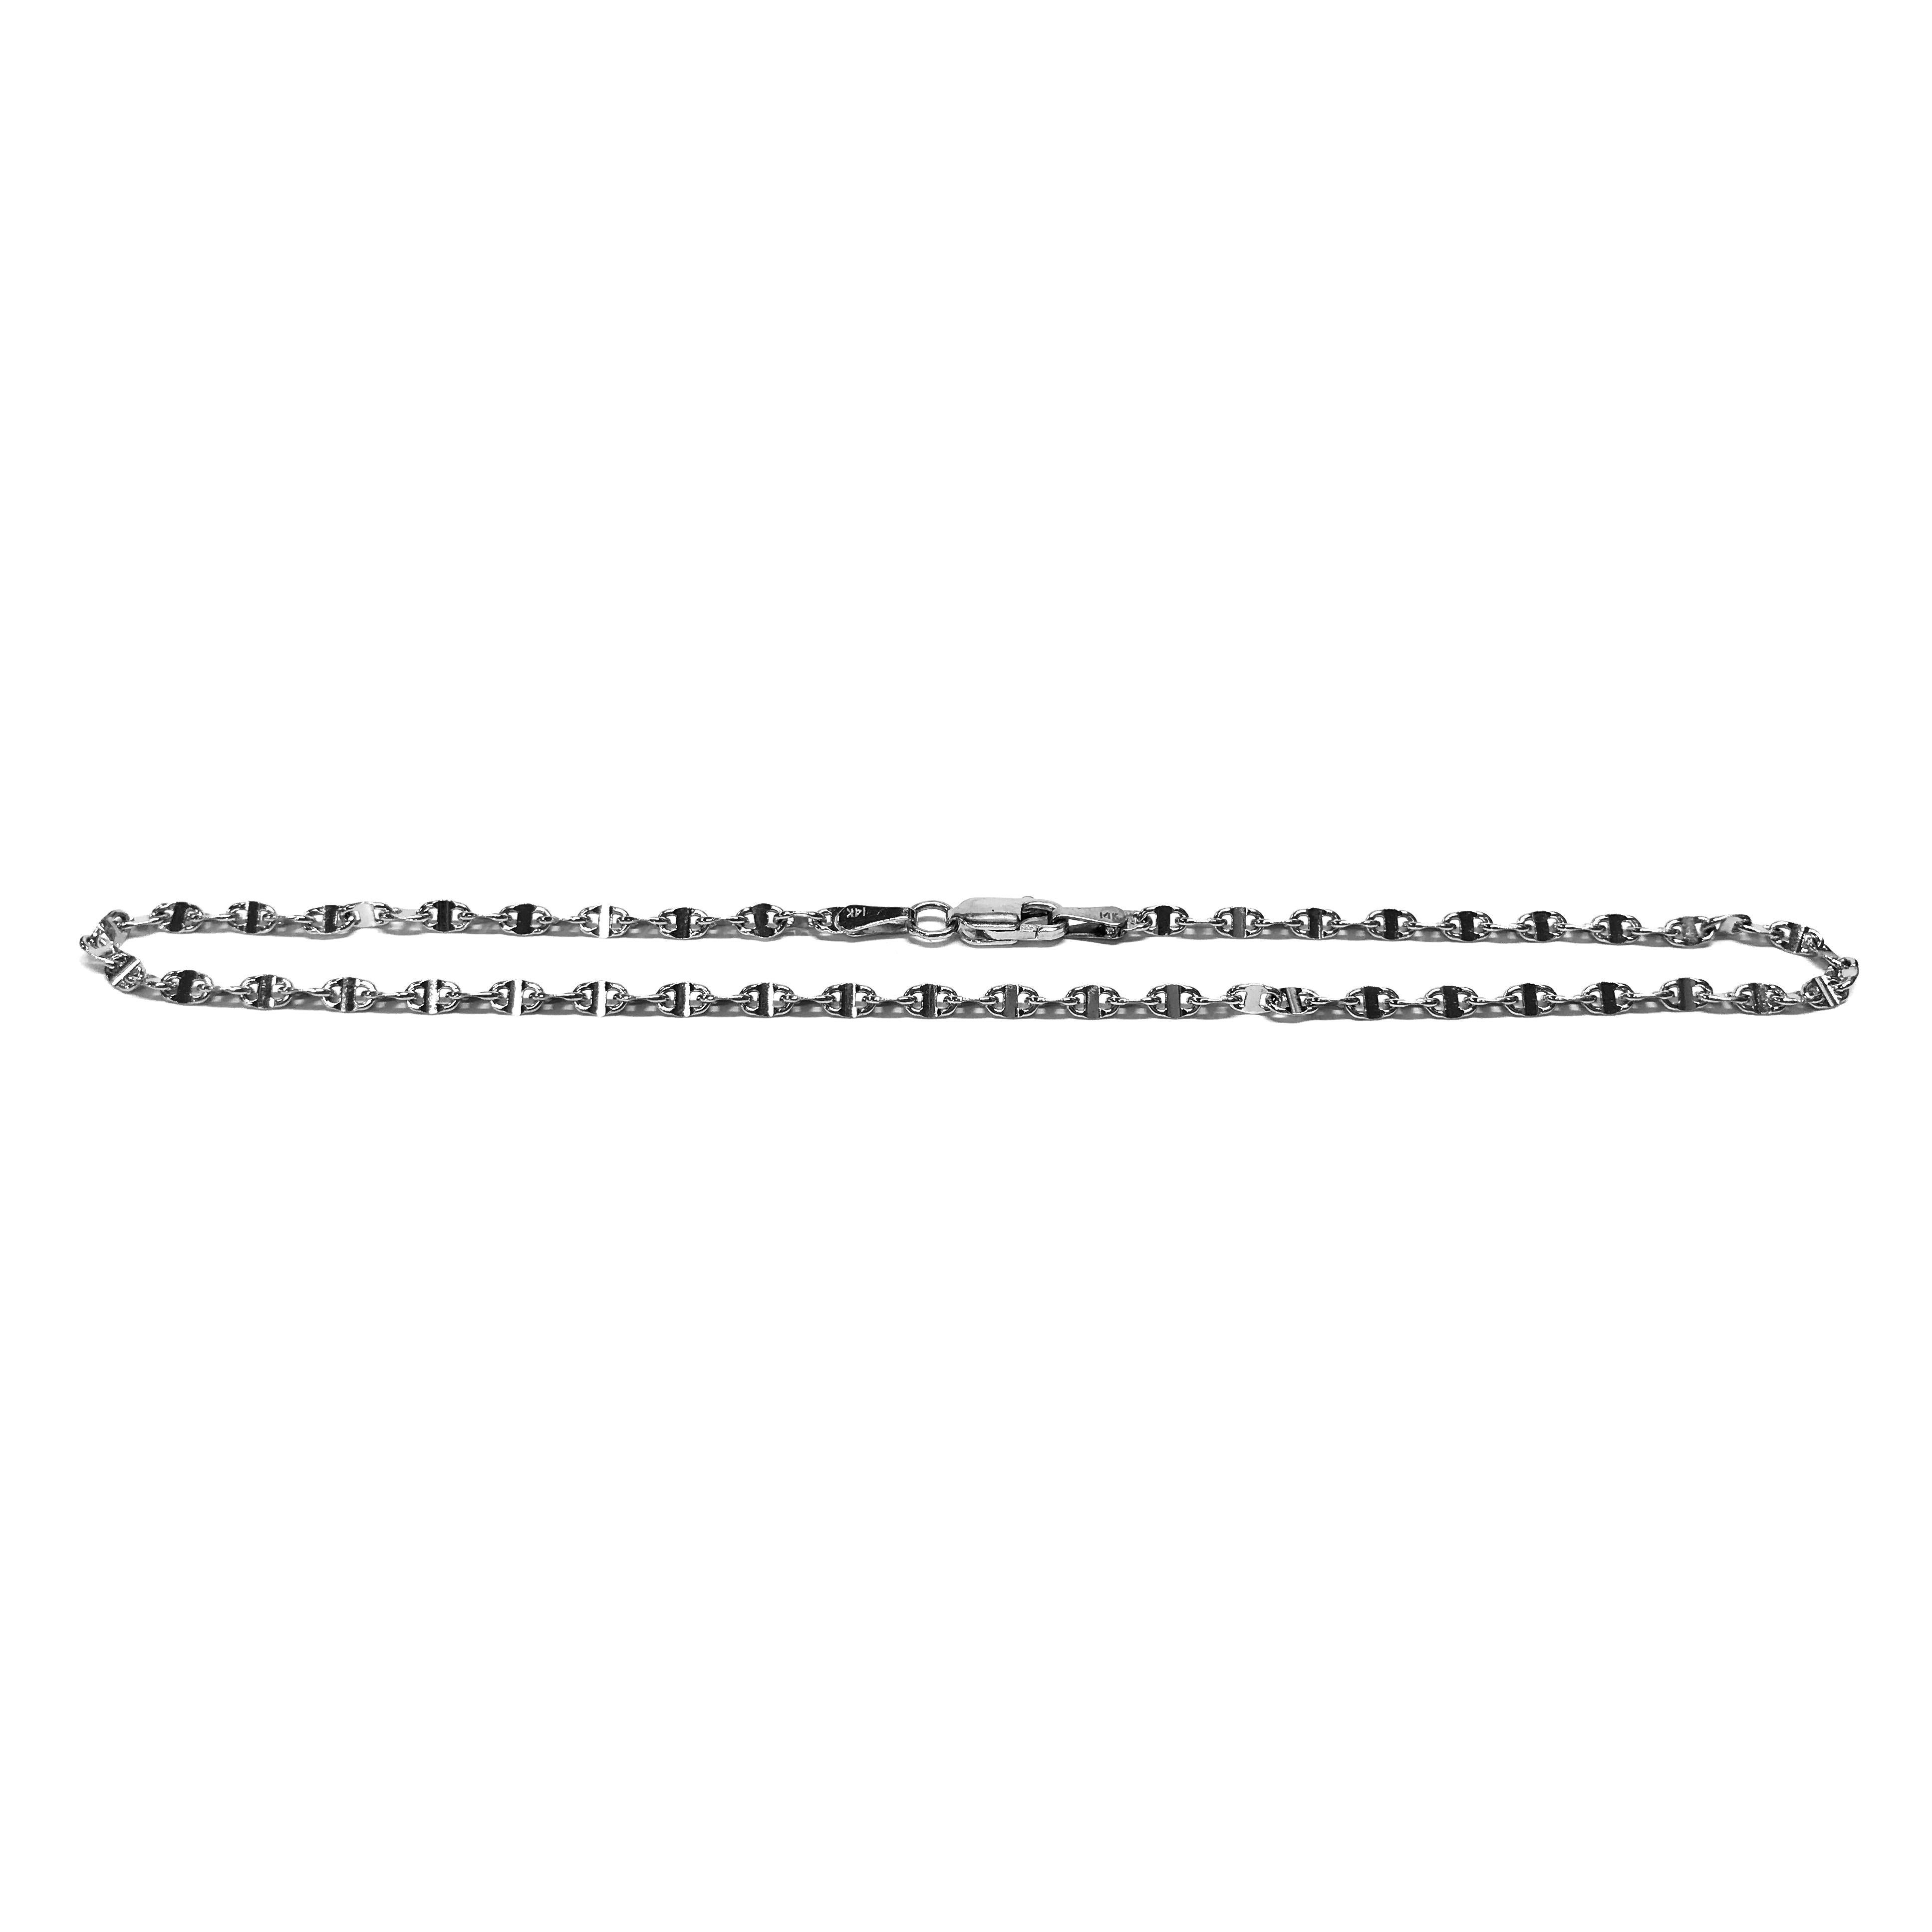 14 Karat White Gold Link Anklet. This anklet features Gucci-style links. The anklet is 11